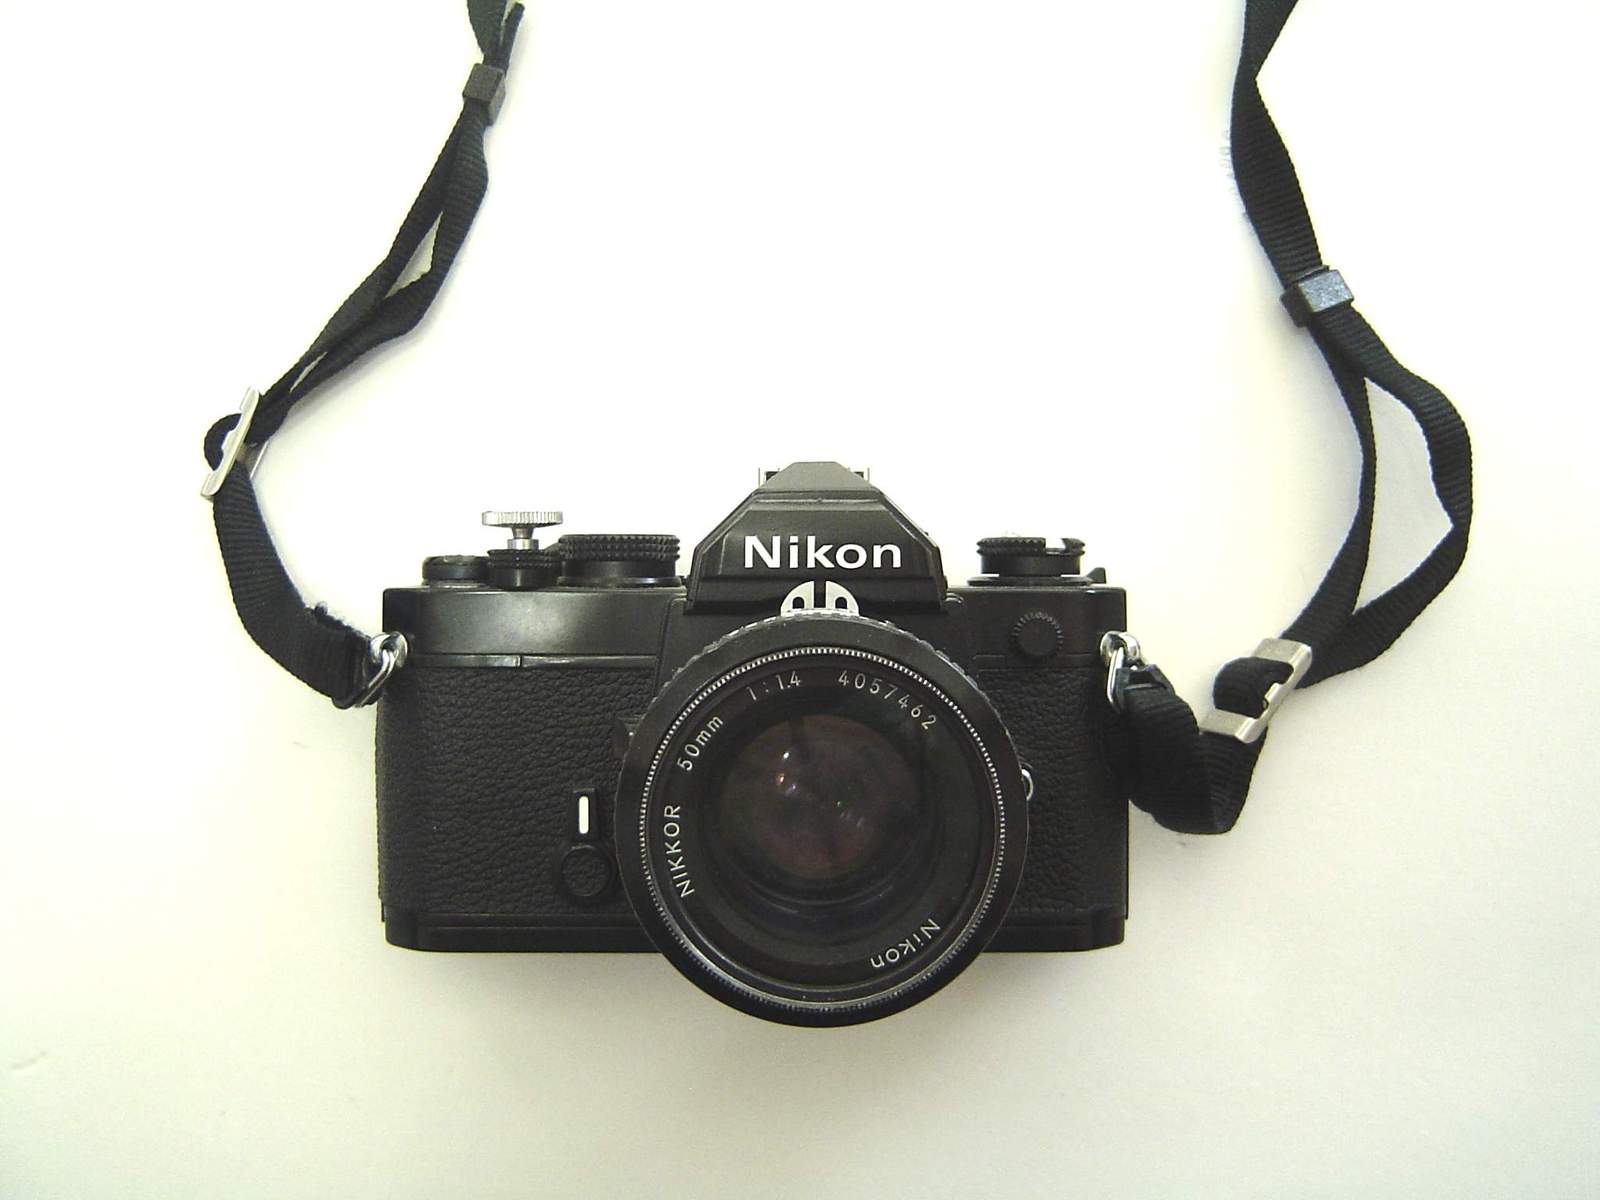 Primary image for  Nikon FM Black Camera (Early Version) w/ 50mm F1.8 Lens 